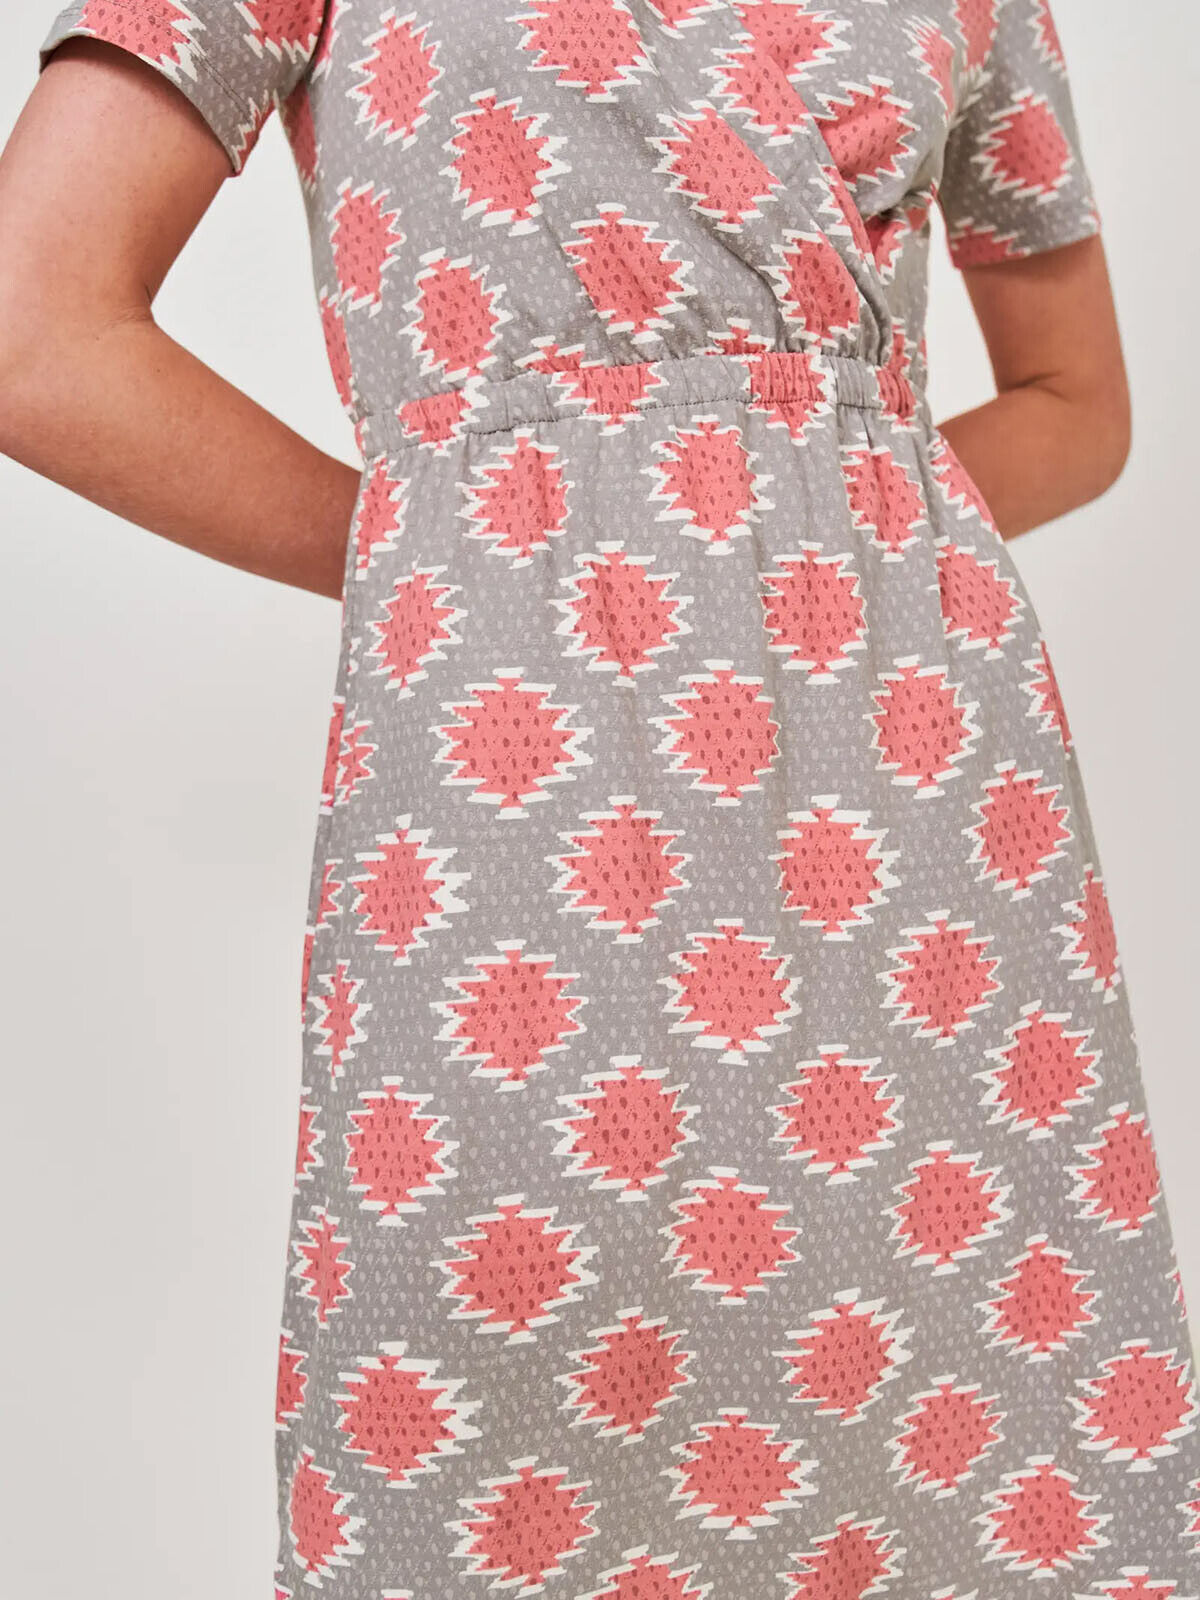 EX WHITE STUFF Grey Anywhere Fairtrade Dress in Sizes 10 or 12 RRP £40